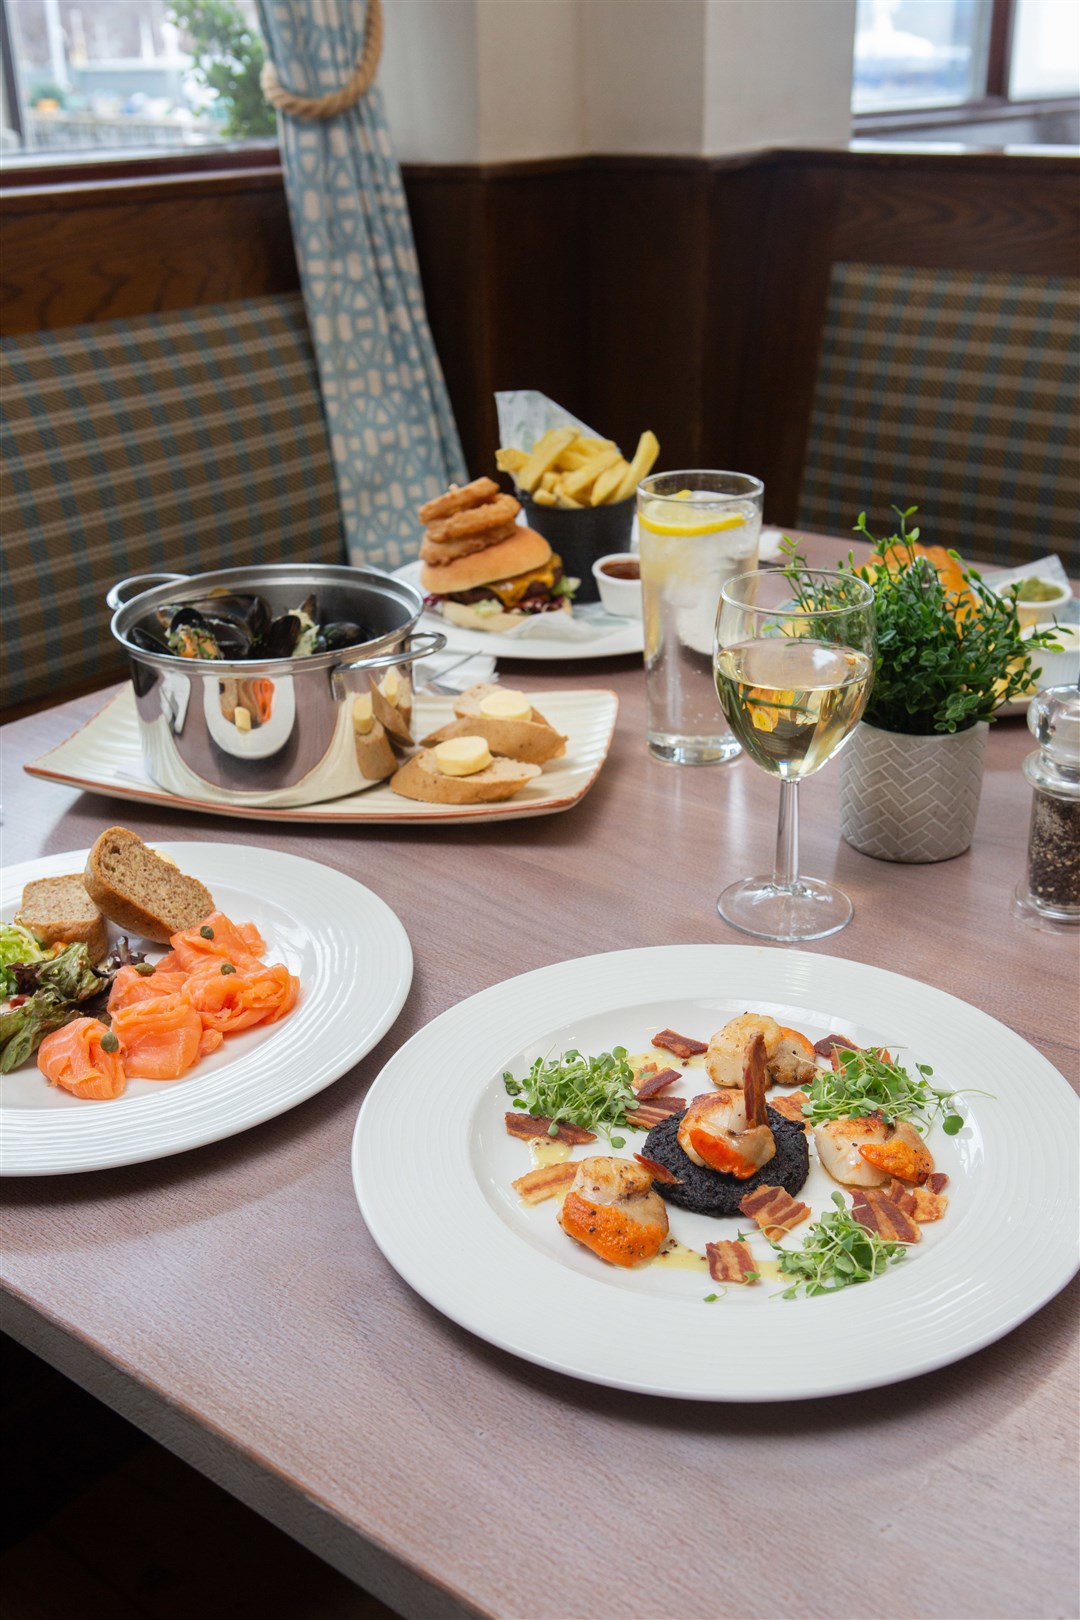 Some of the mouth-watering offer at The Seaforth. Picture by: Alison White Photography.